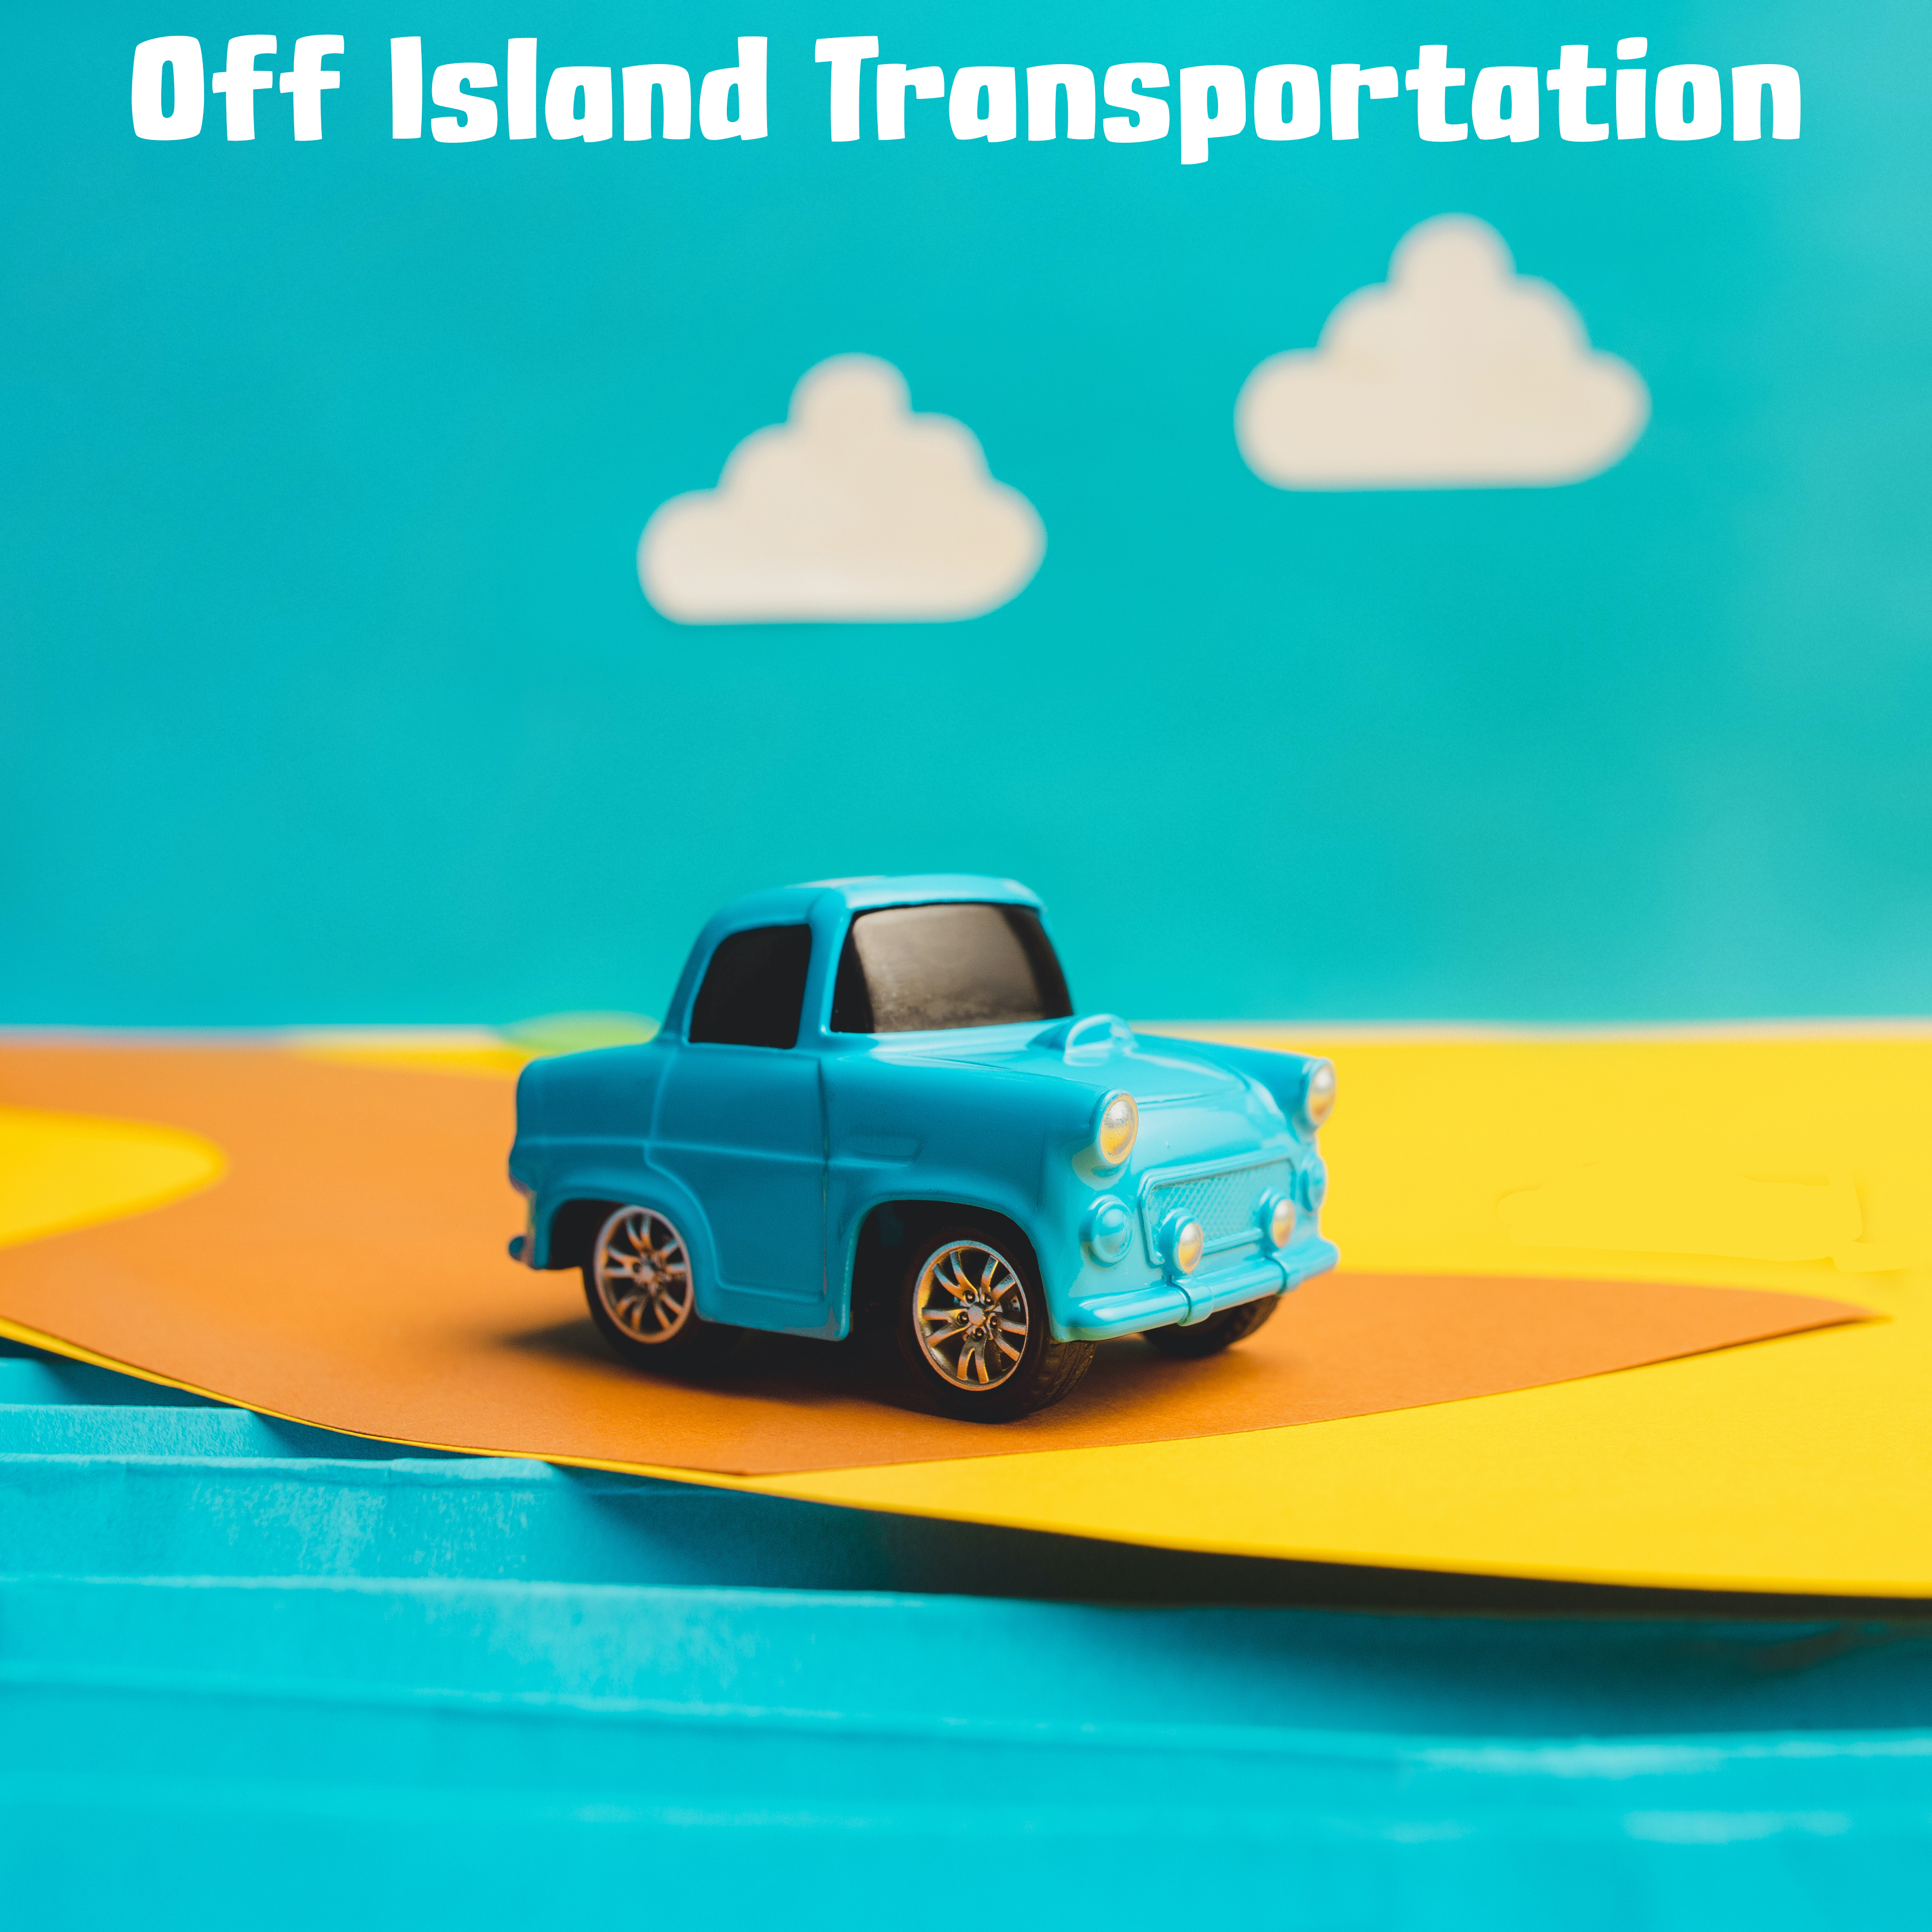 Off Island Transportation Now Available to Members